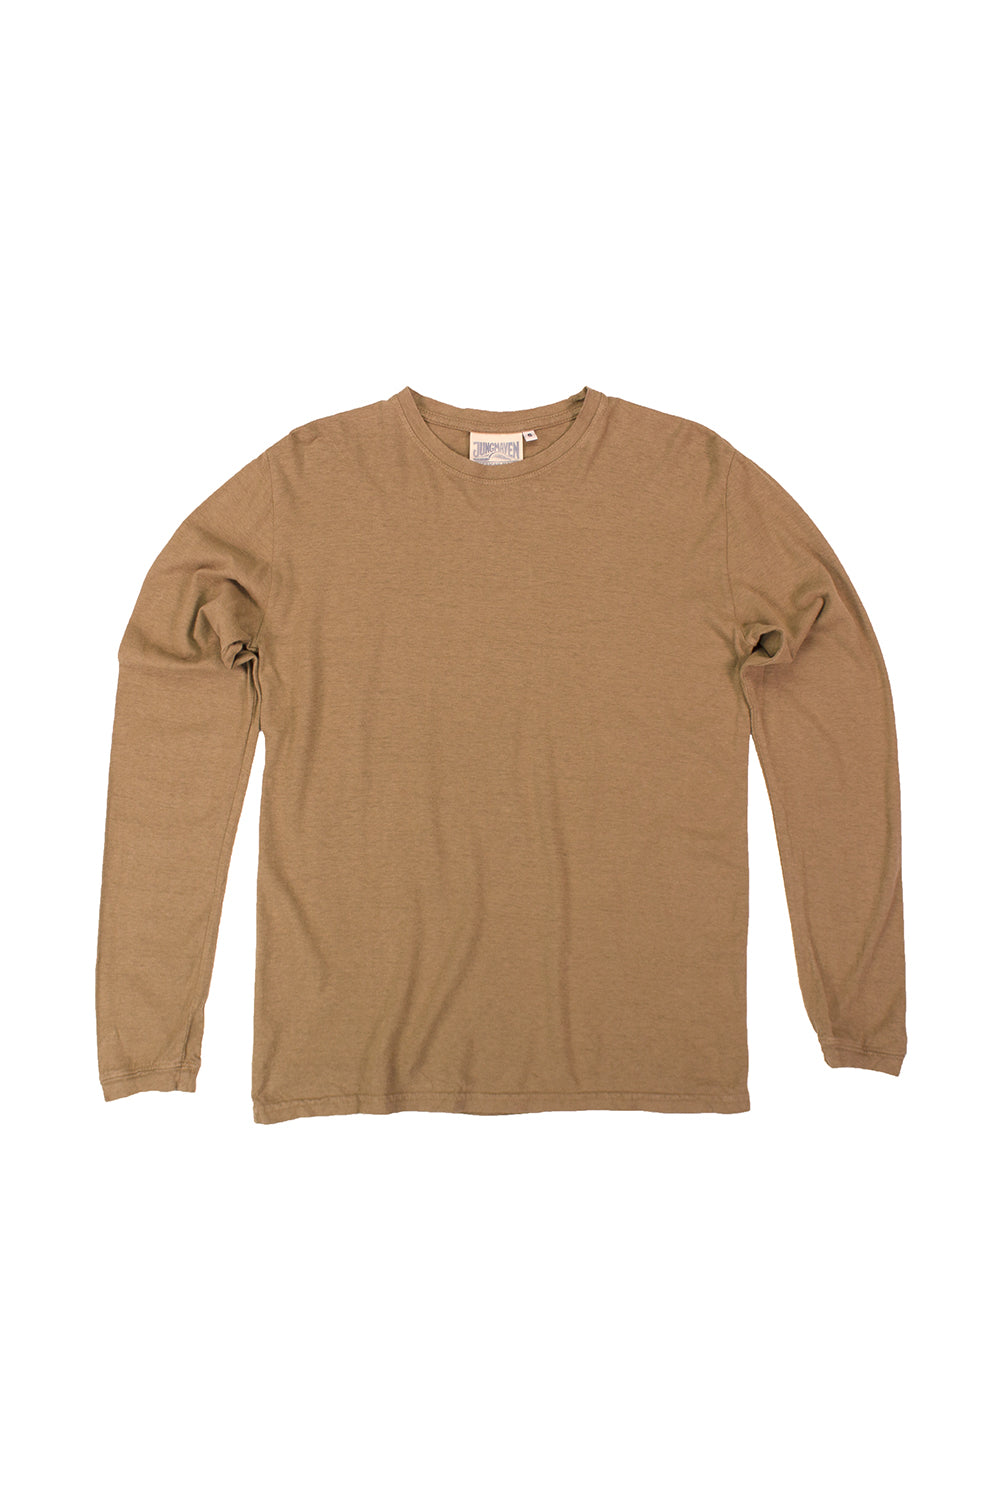 Jung Long Sleeve Tee | Jungmaven Hemp Clothing & Accessories / Color: Coyote